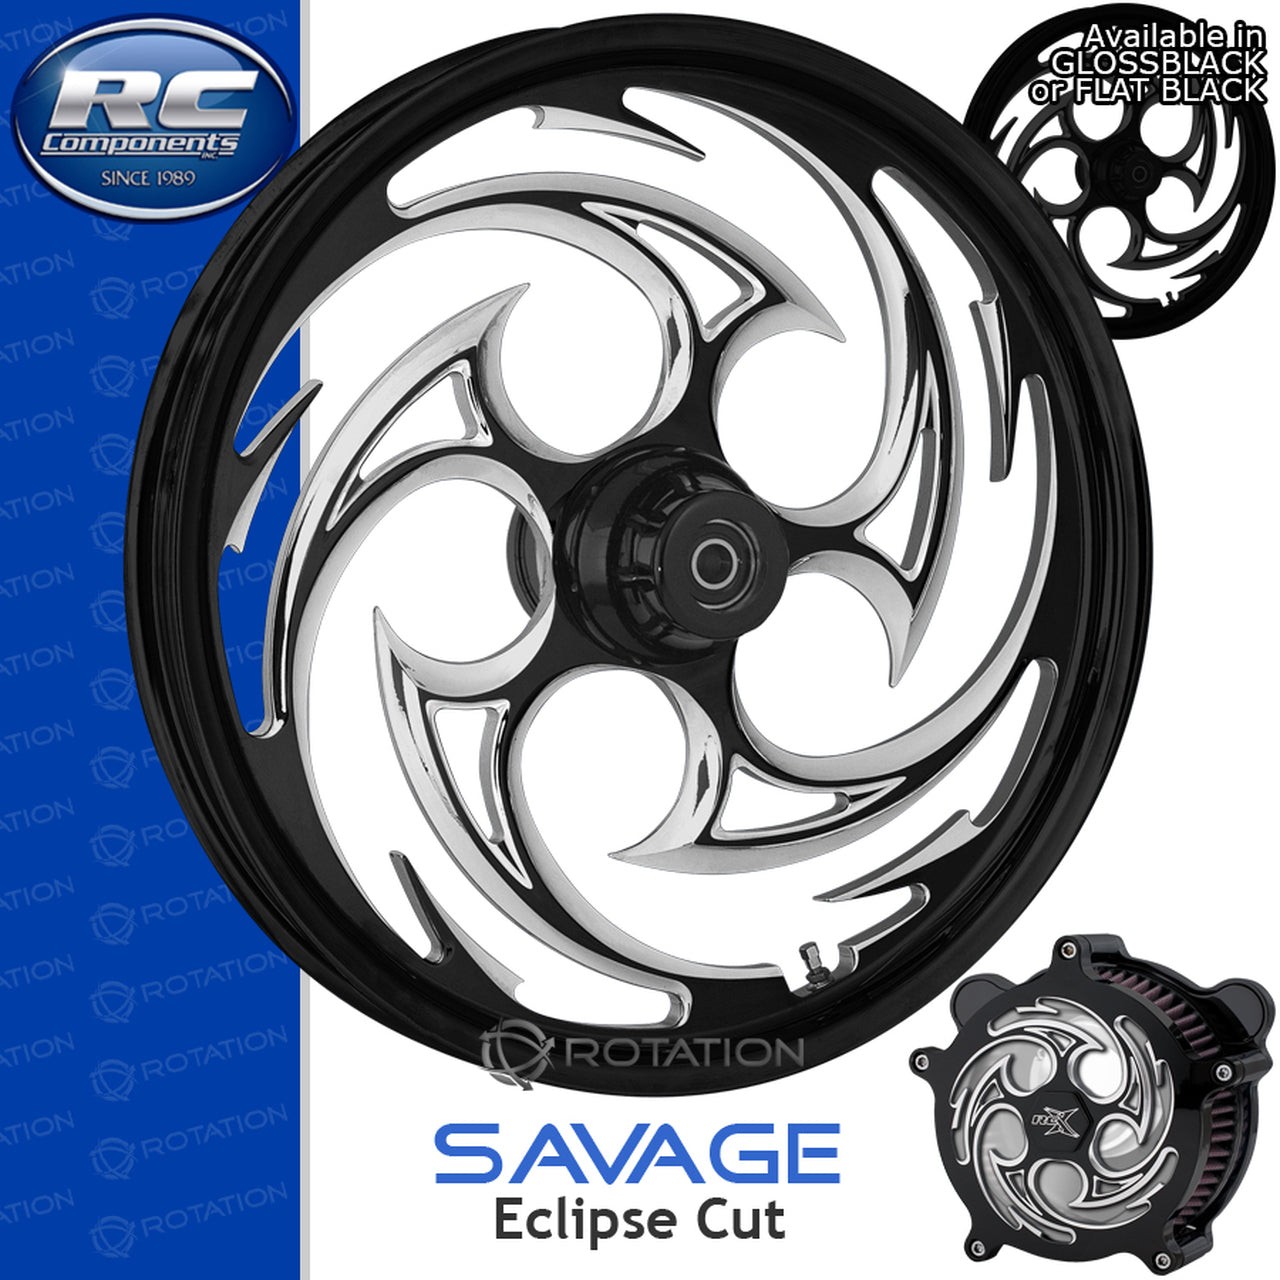 RC Components Savage Eclipse Touring Wheel